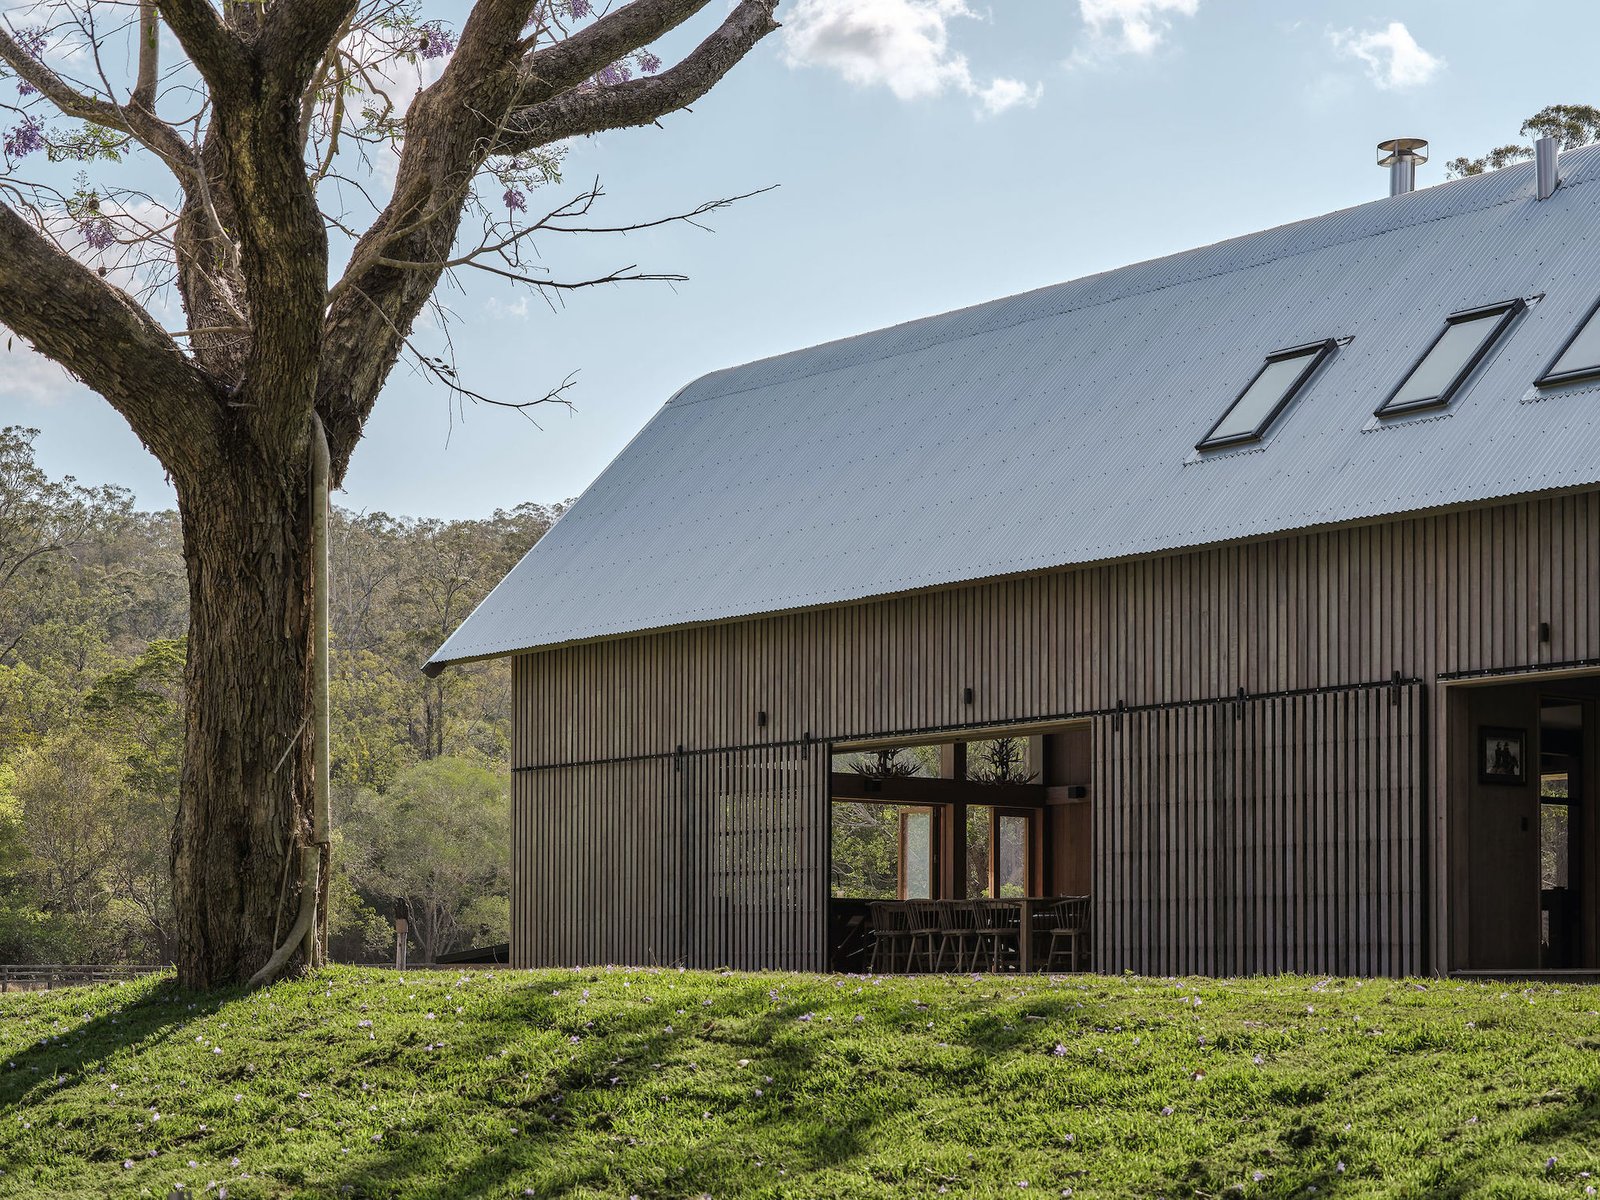 Photo 11 of 19 in This Weekend Getaway Gives the Traditional American Barn an Australian Twist